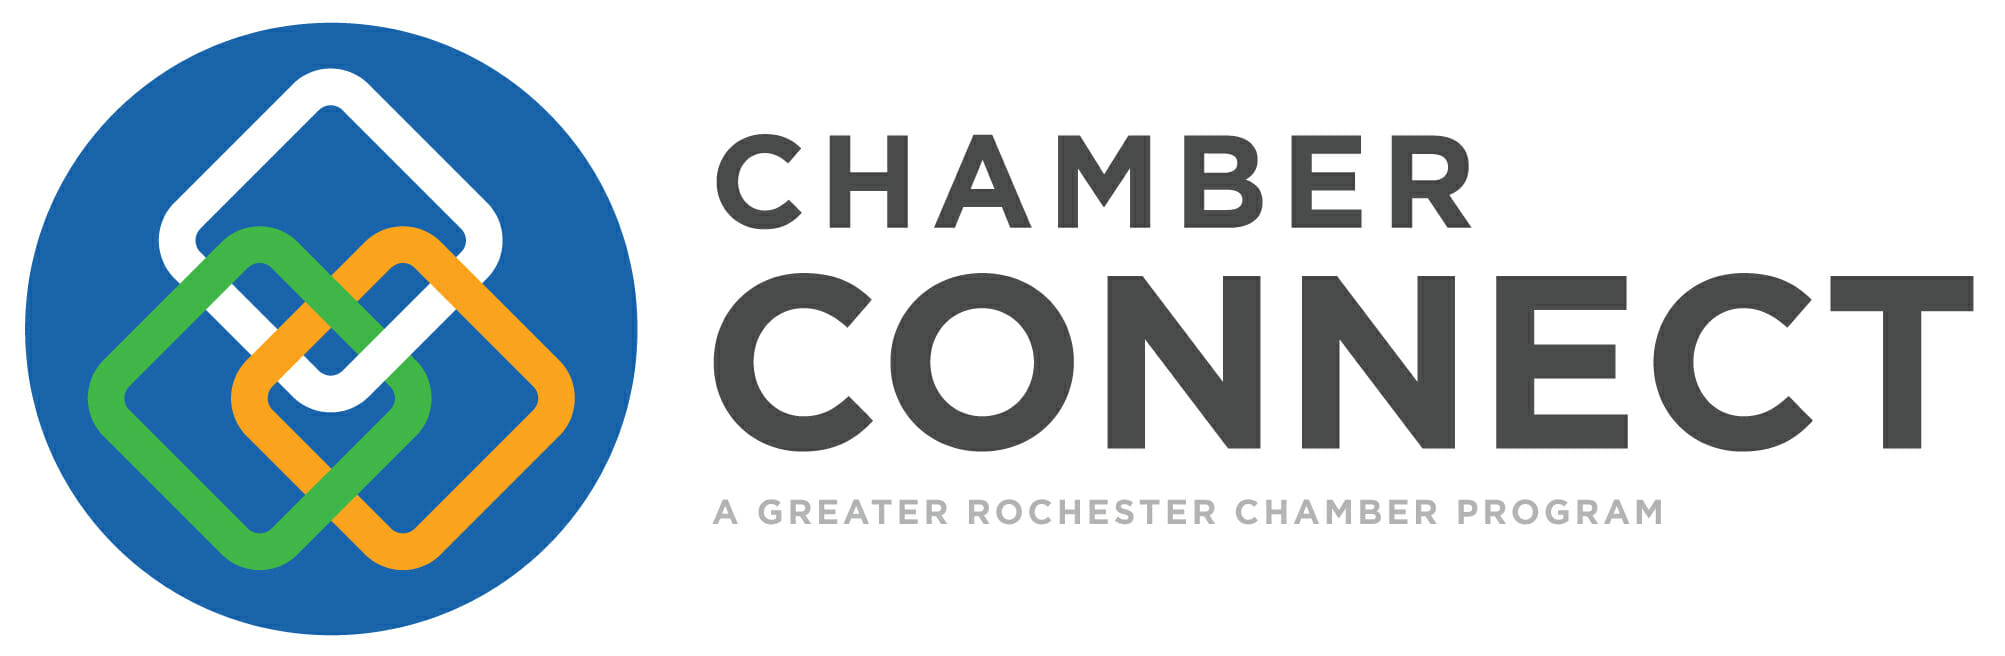 Chamber-Connect-Logo---Greater-Rochester-Chamber-White-Landscape